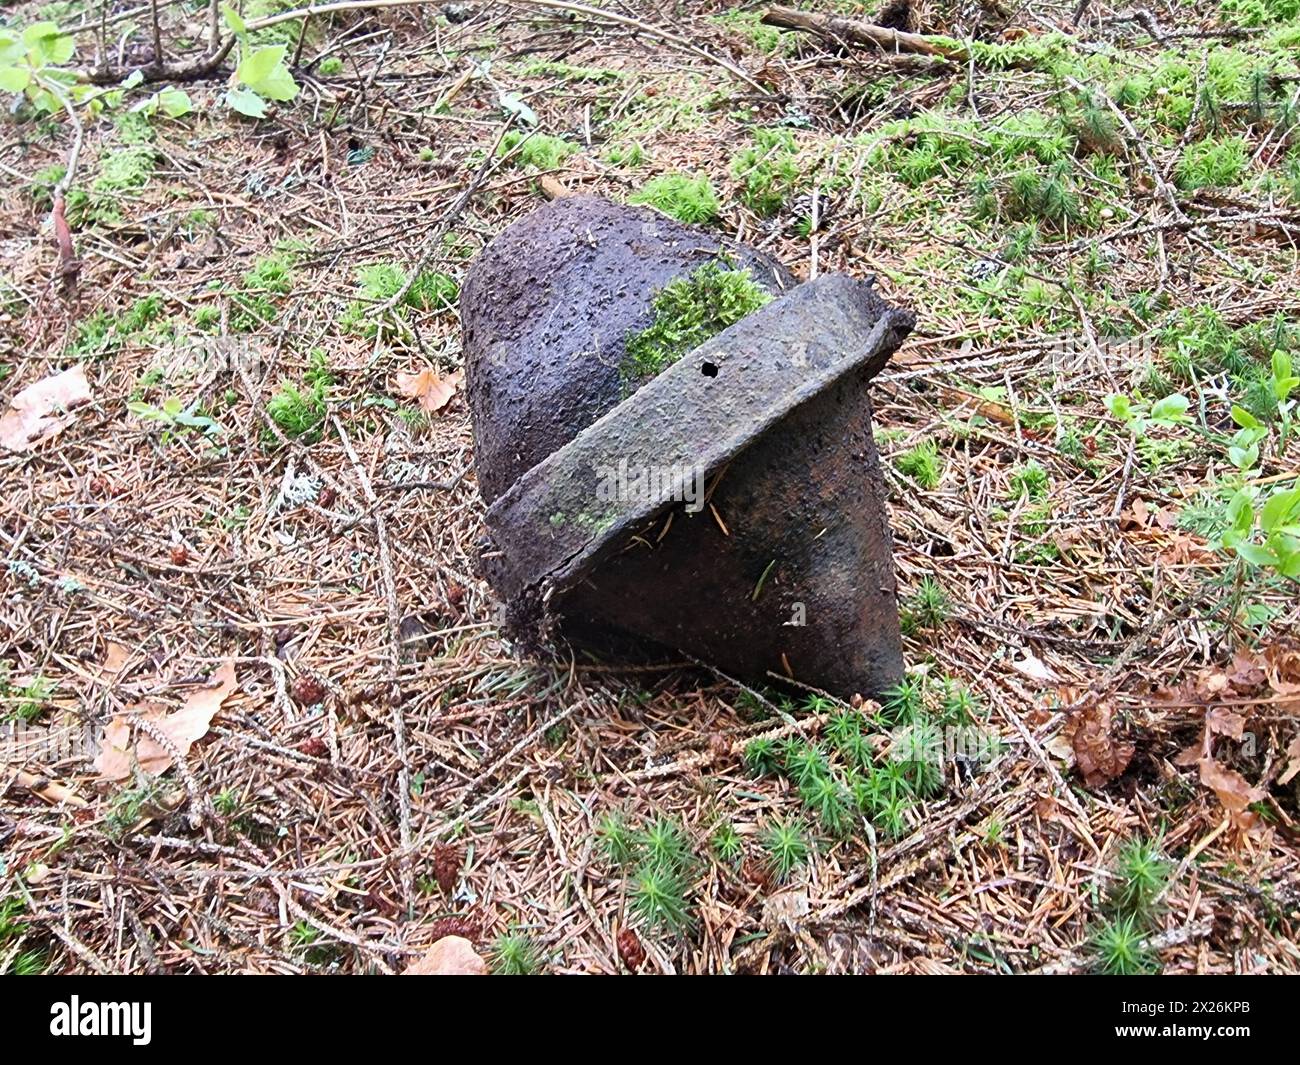 The Panzerfaust is a German hand-held anti-tank weapon from World War II. A tourist found it in the place where the so-called Iron Curtain ran. The pi Stock Photo